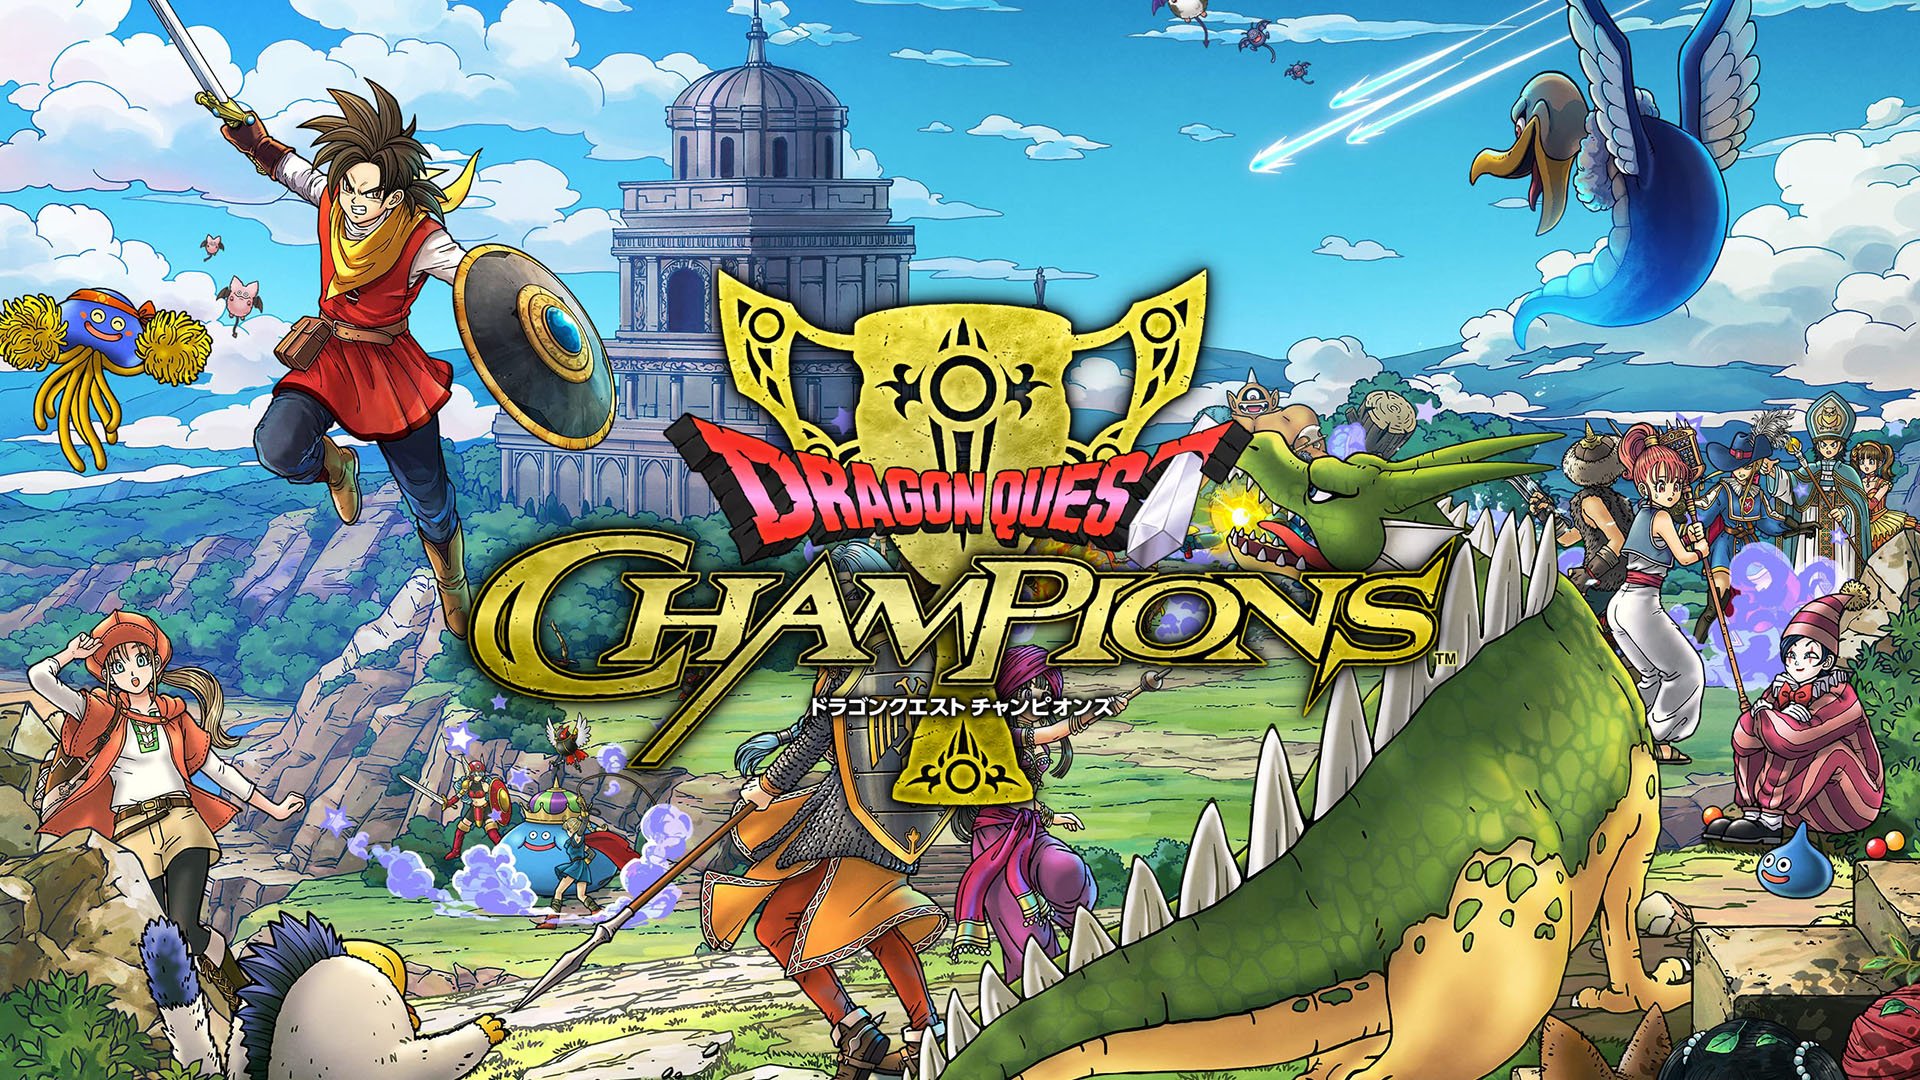 Dragon Quest Champions for iOS and Android has been announced